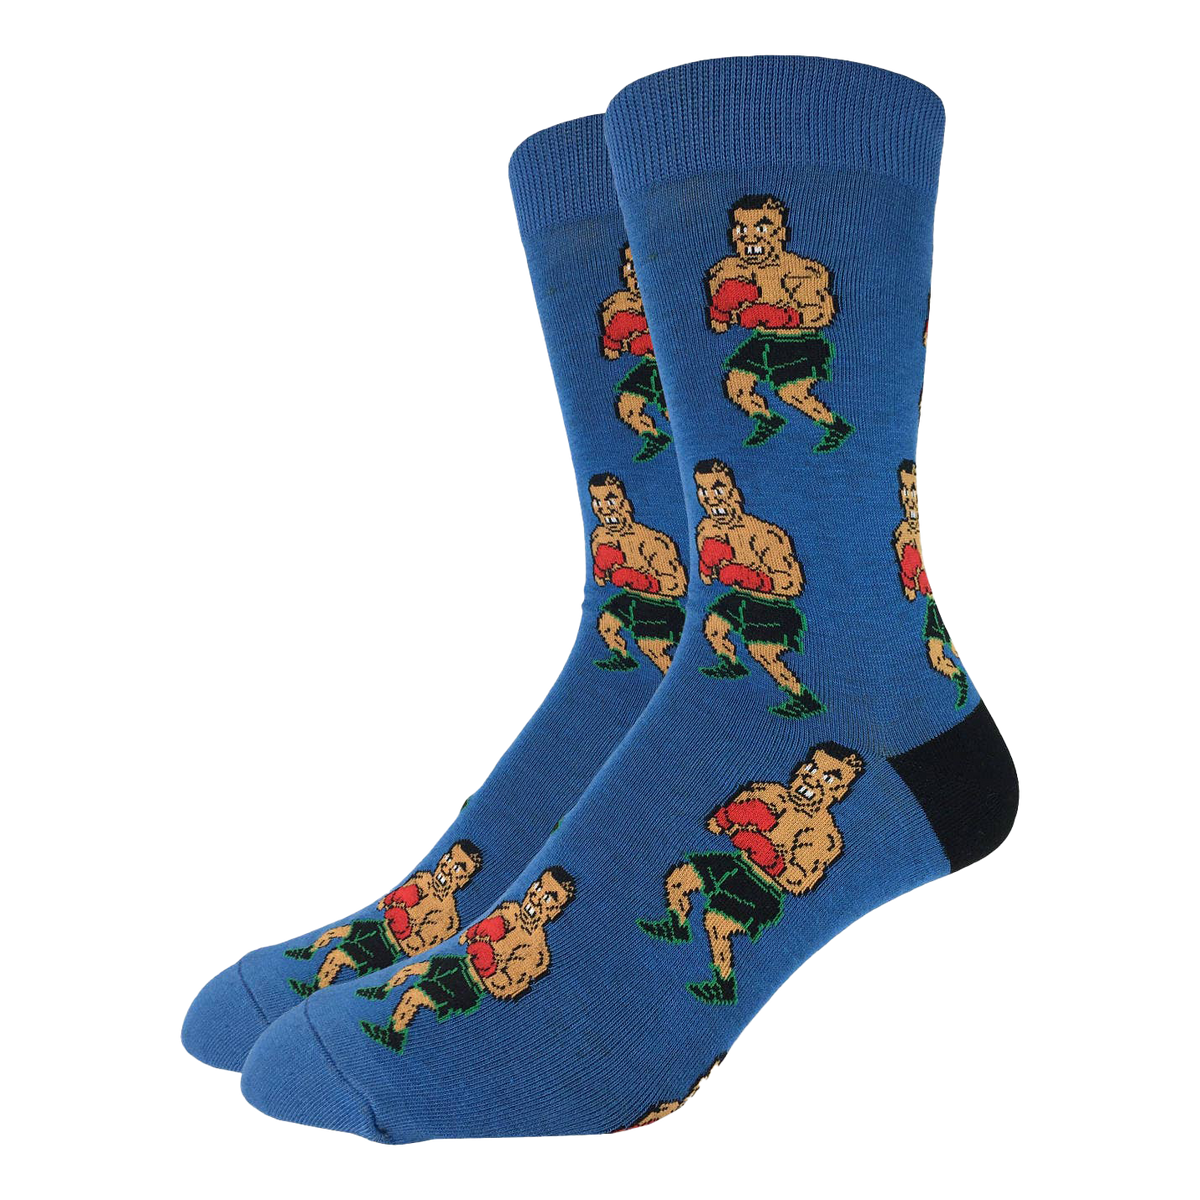 Tyson Punch-Out!! Socks